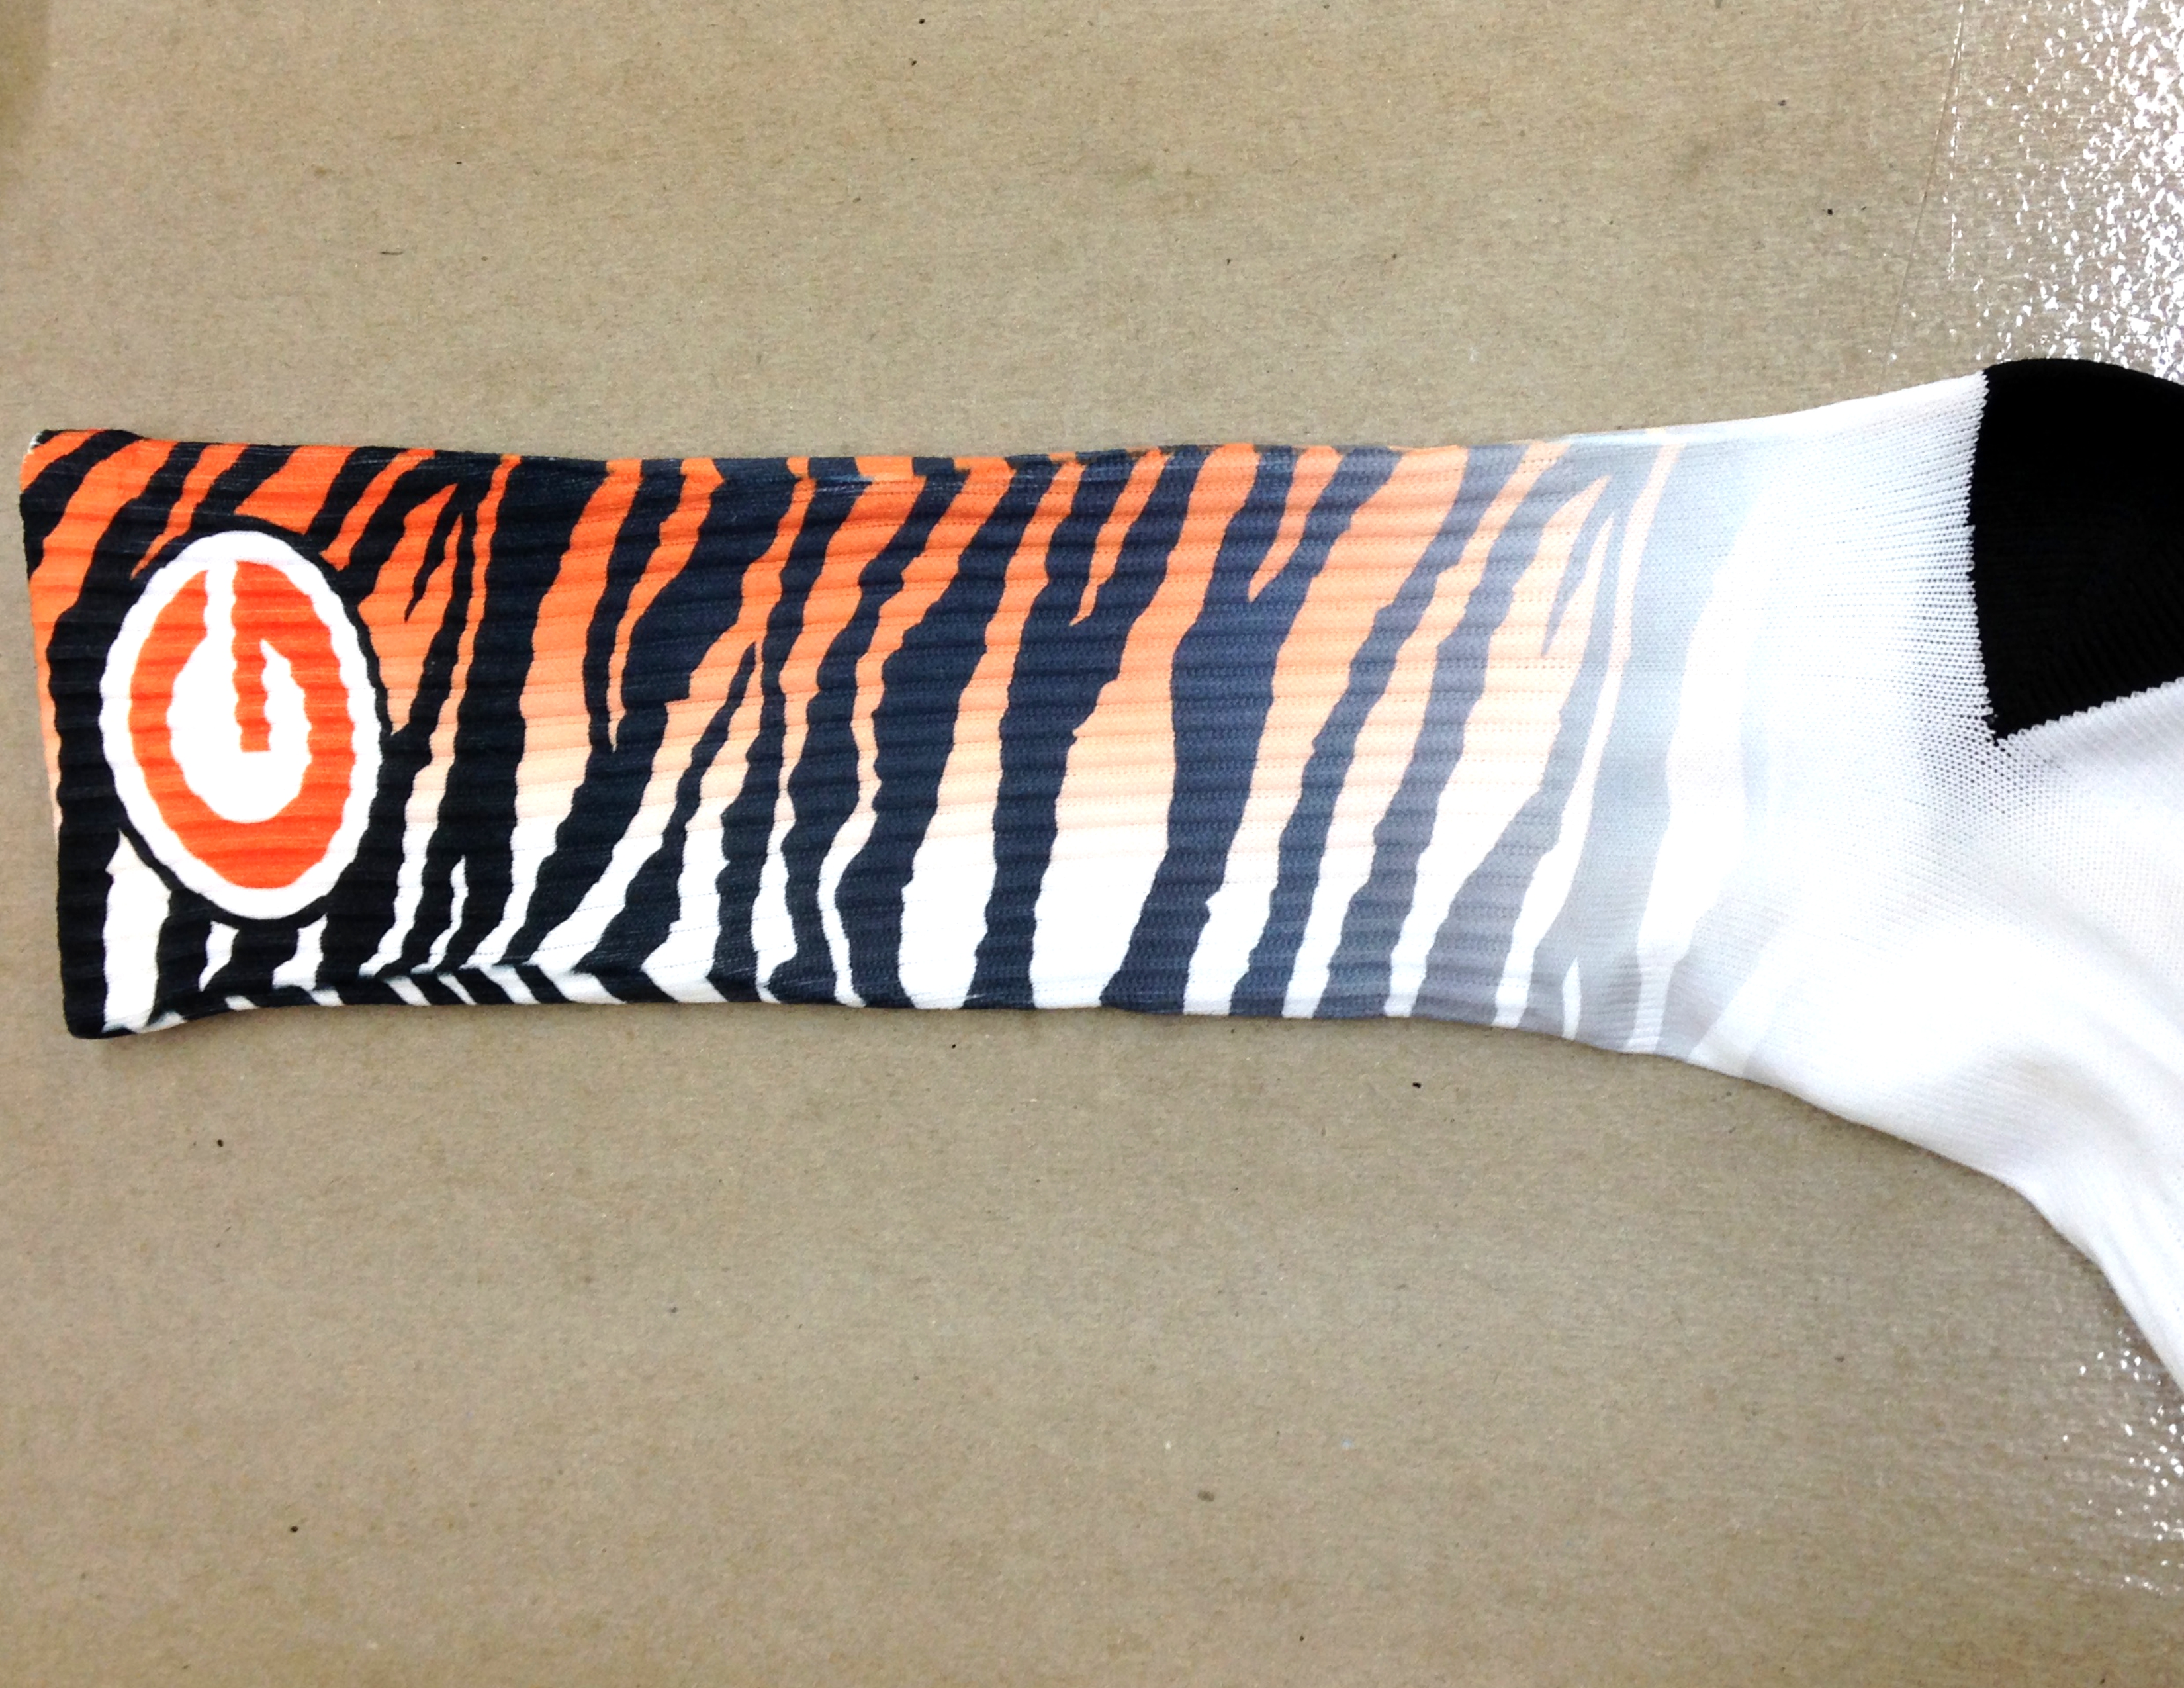 Tiger Pride made with sublimation printing